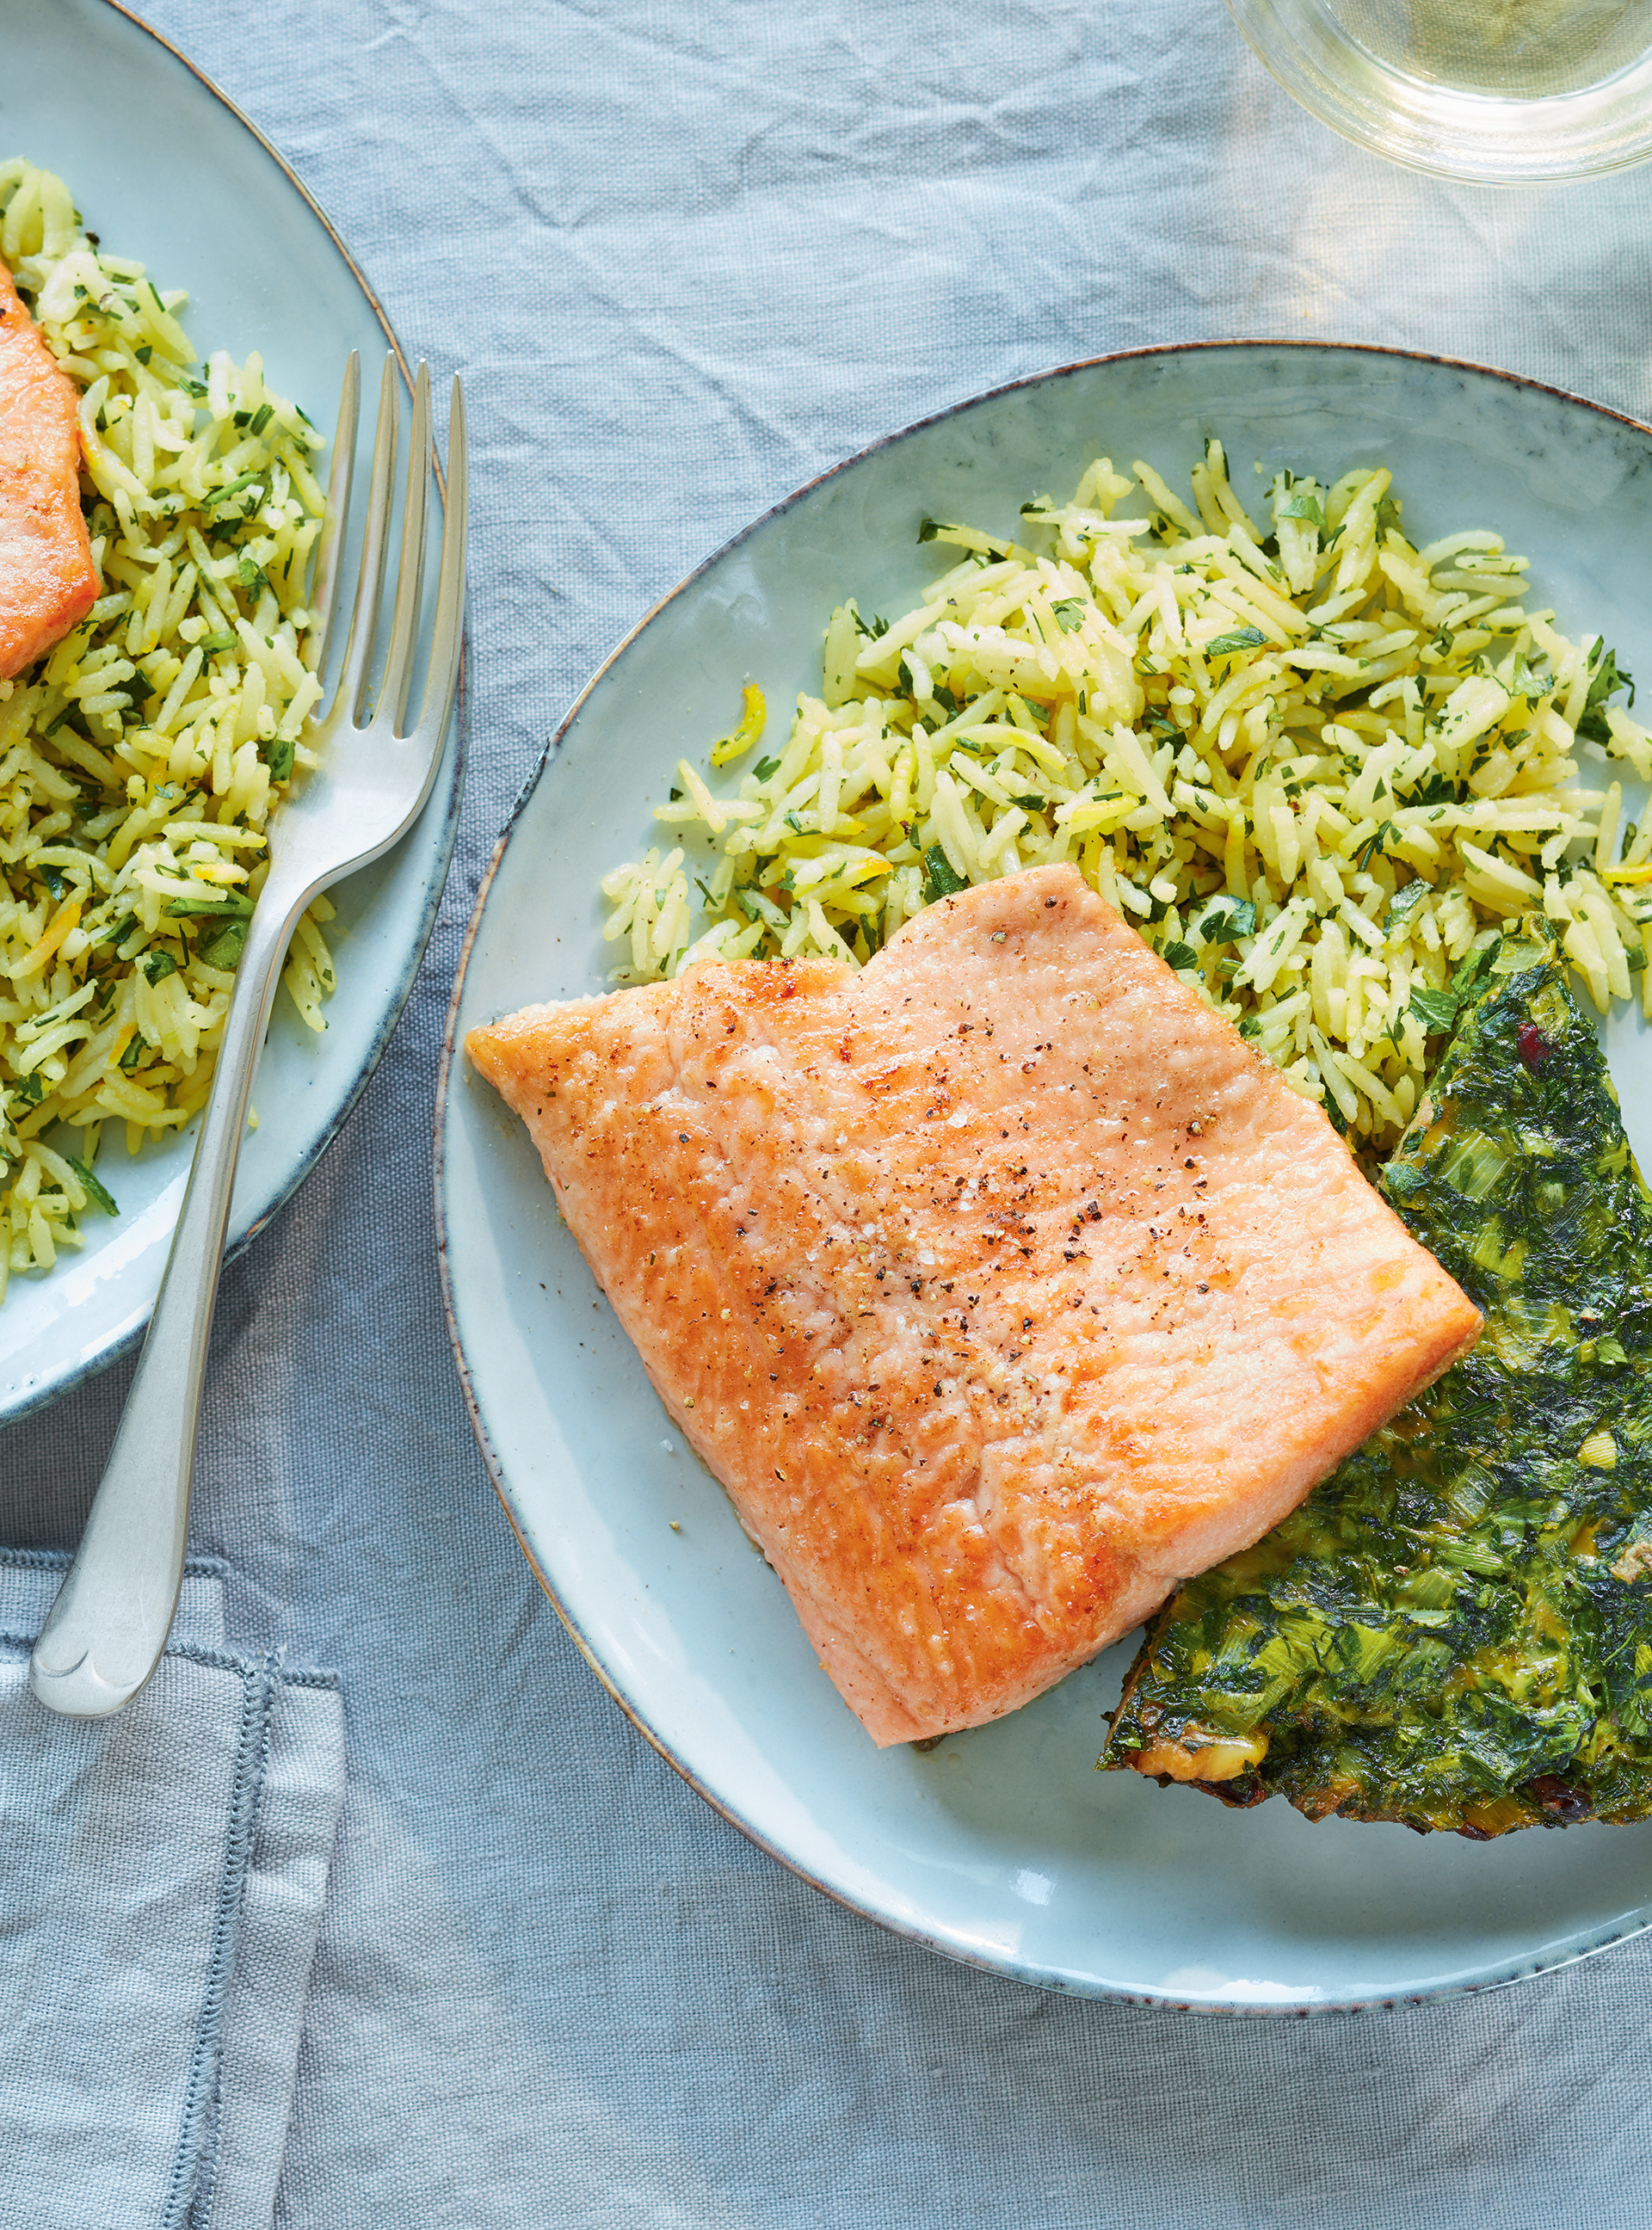 Herbed Rice with Pan-Fried Trout